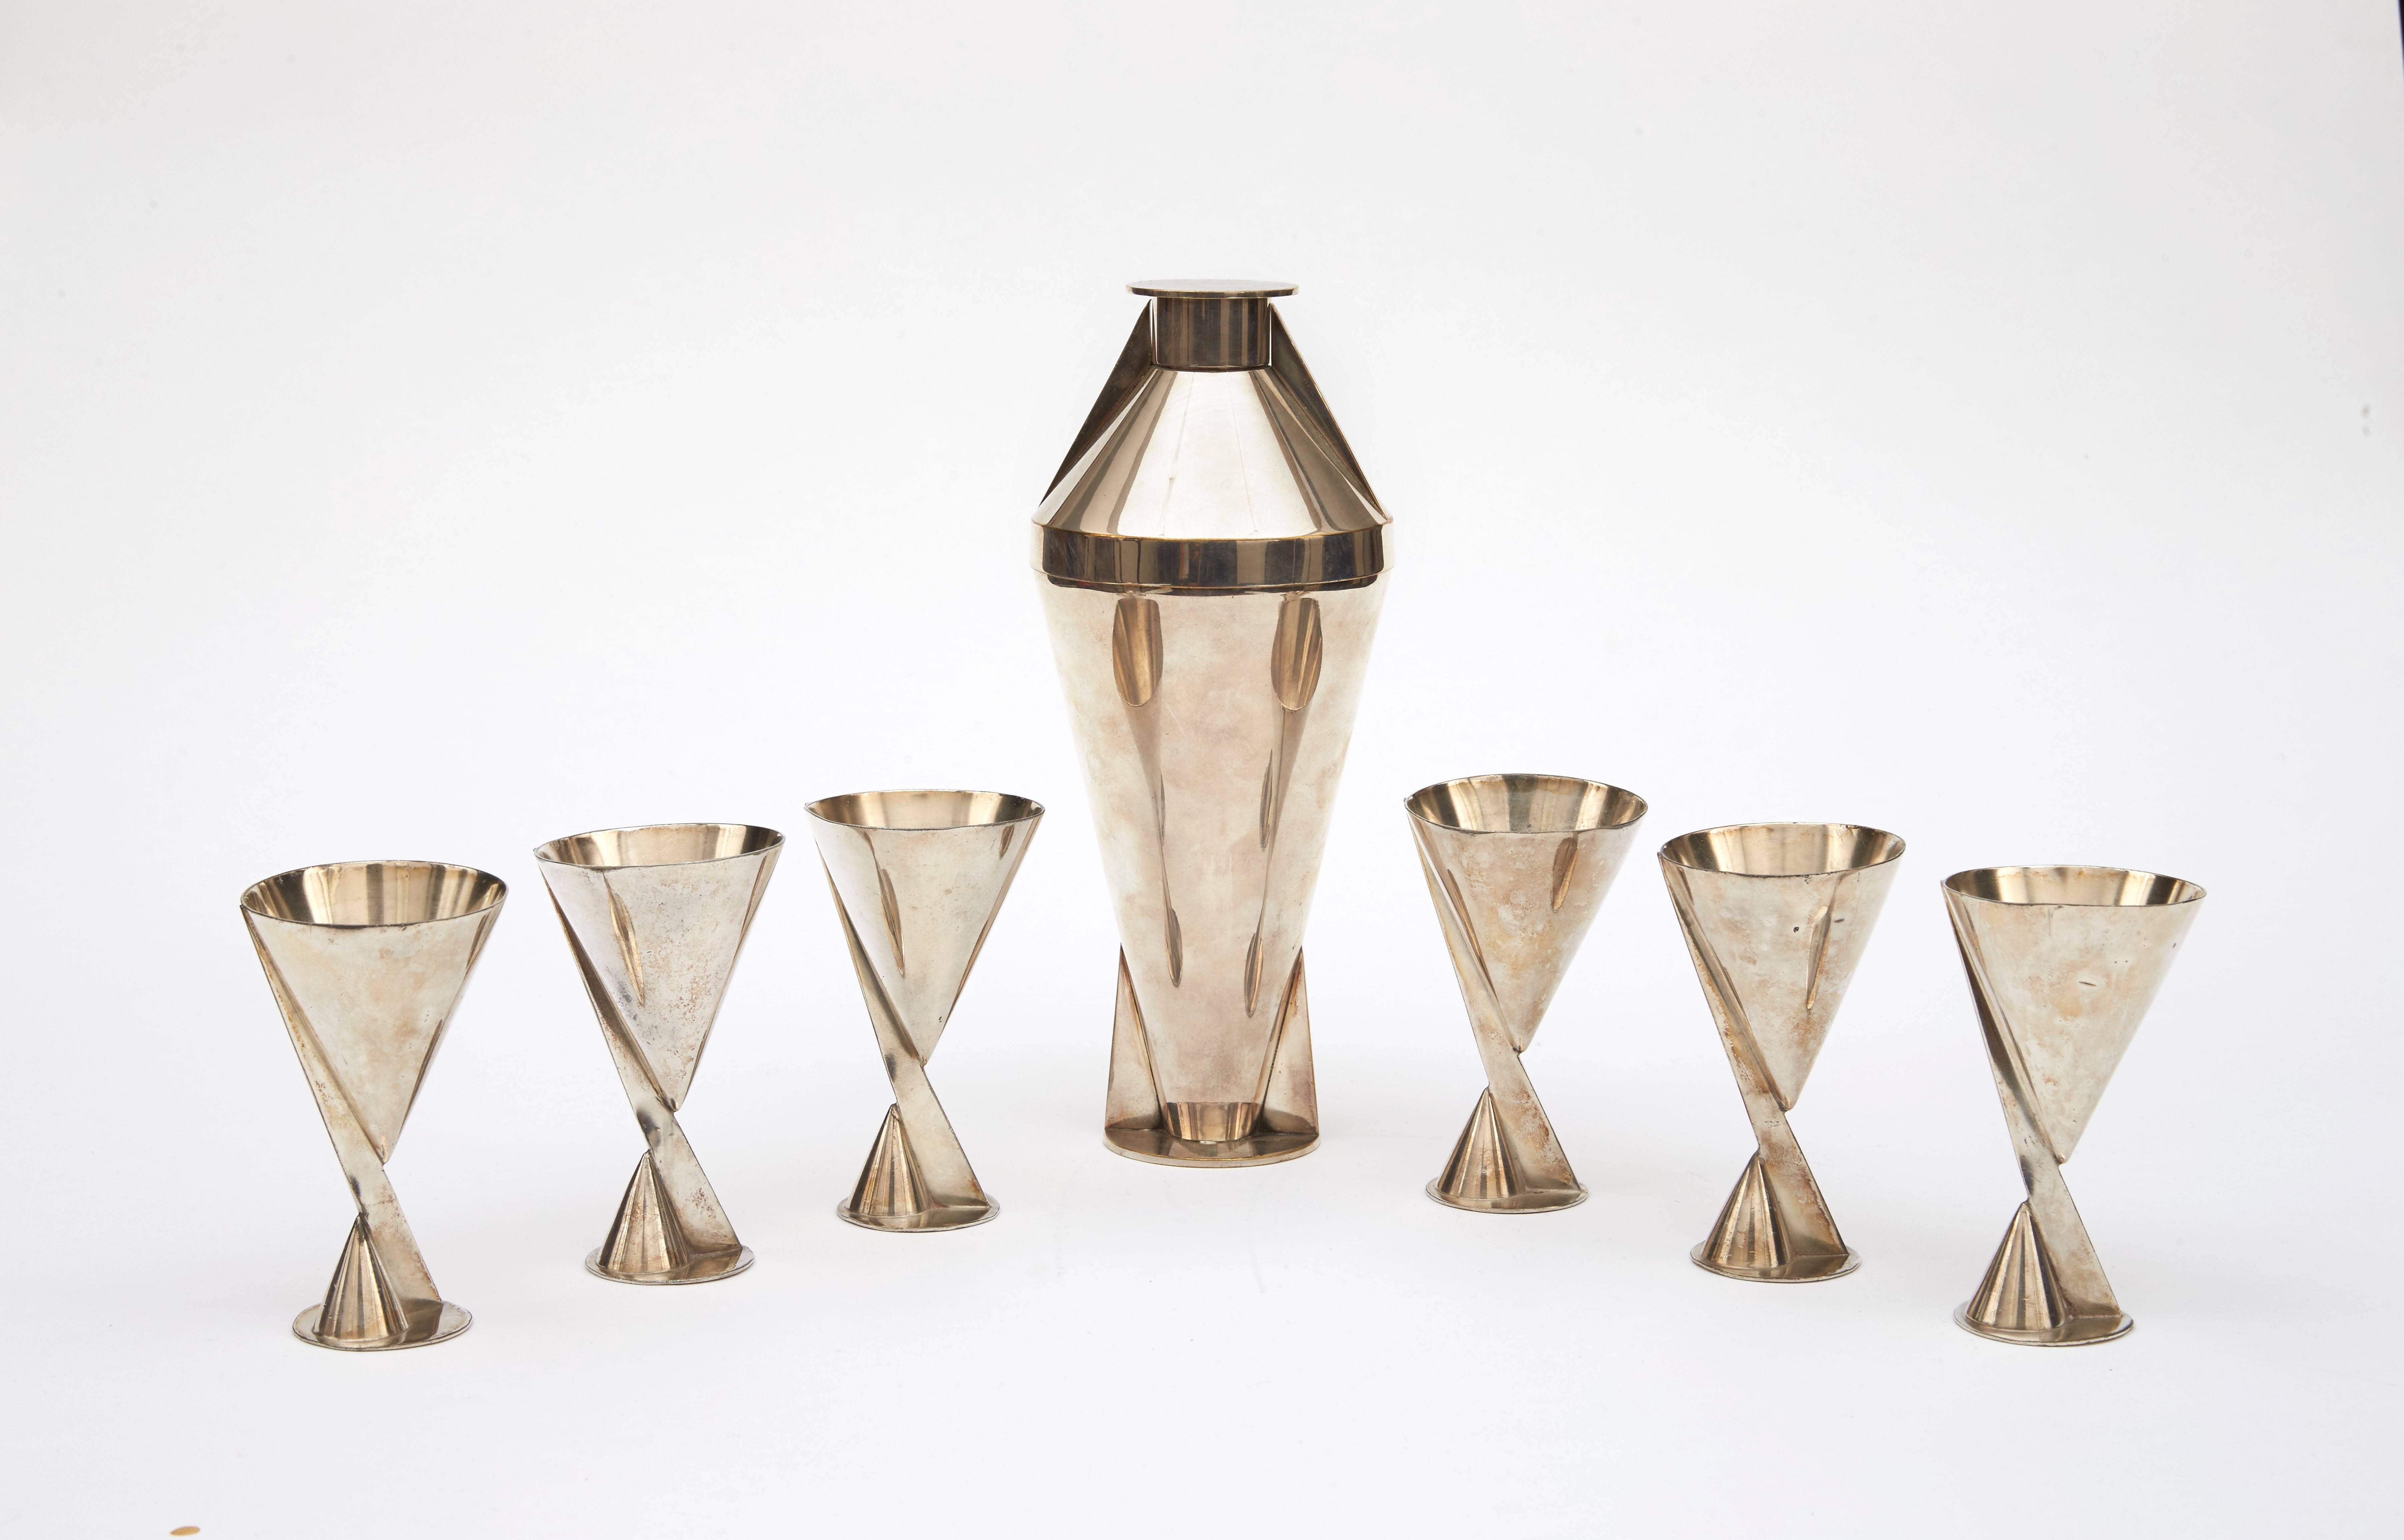 Cocktail set composed with a tapered silver-plated metal shaker and six cocktail glasses in silver-plated metal. Underside stamped with 